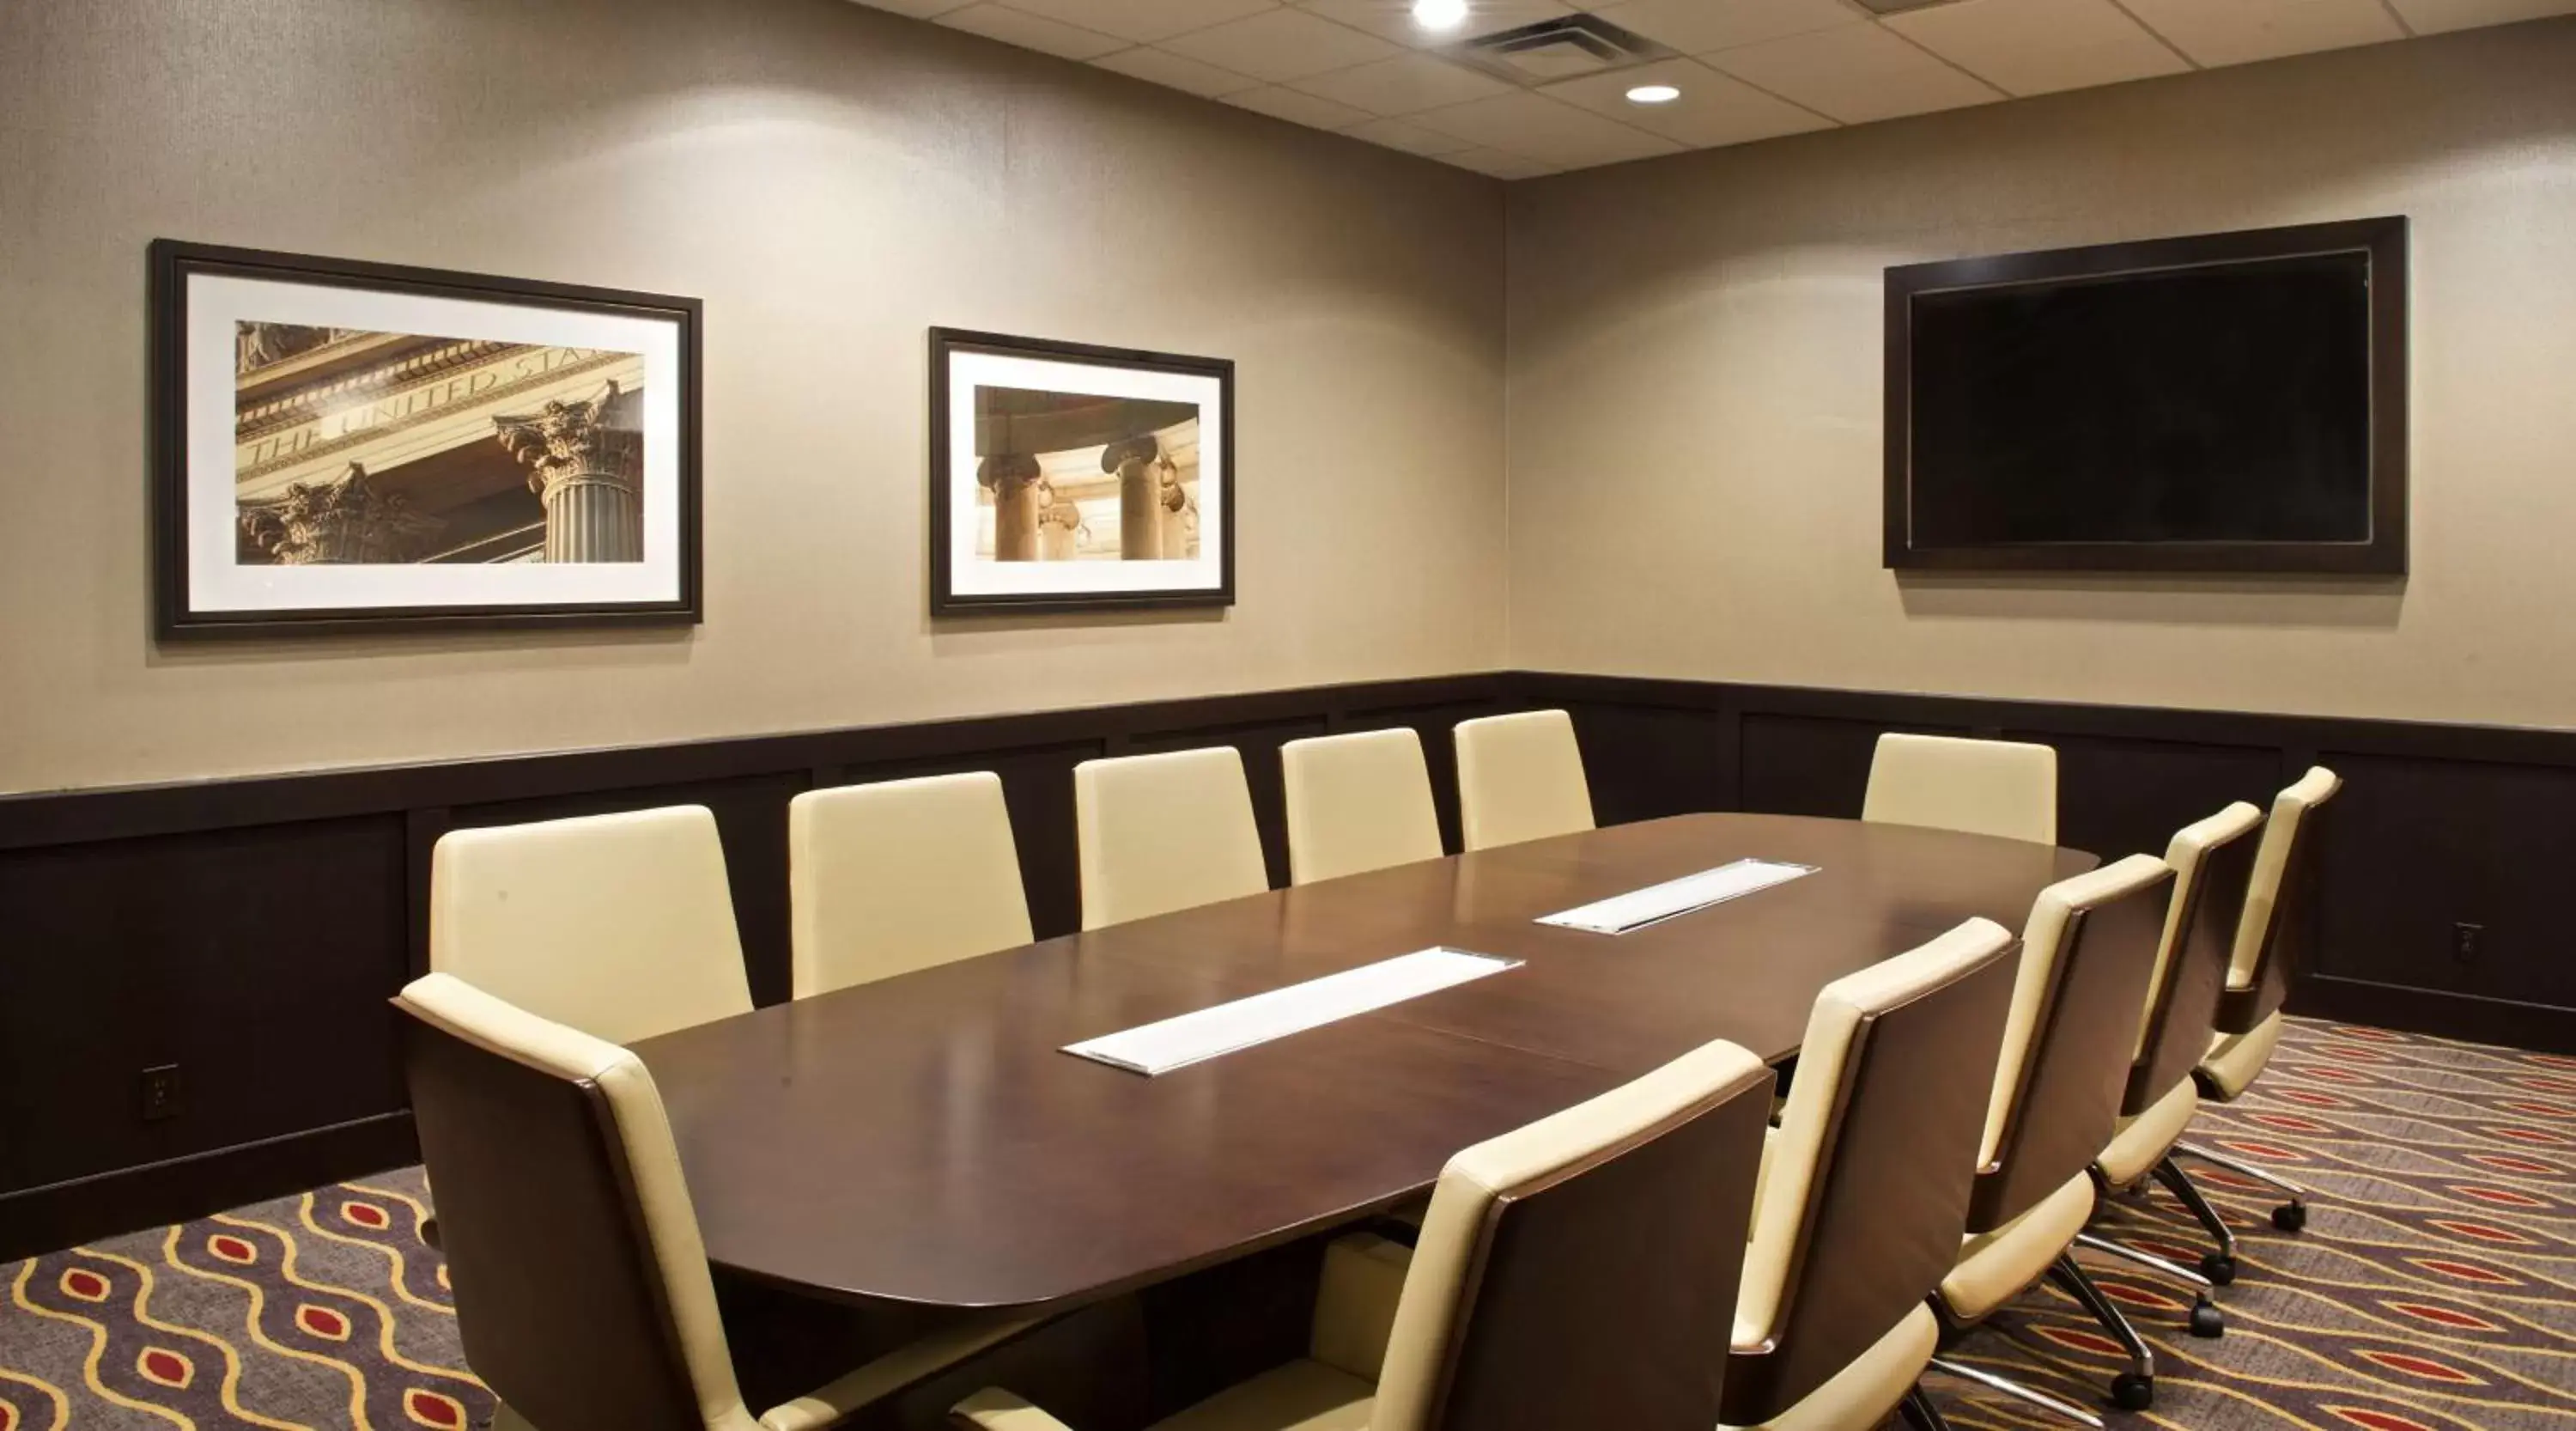 Meeting/conference room in Embassy Suites by Hilton Dulles Airport